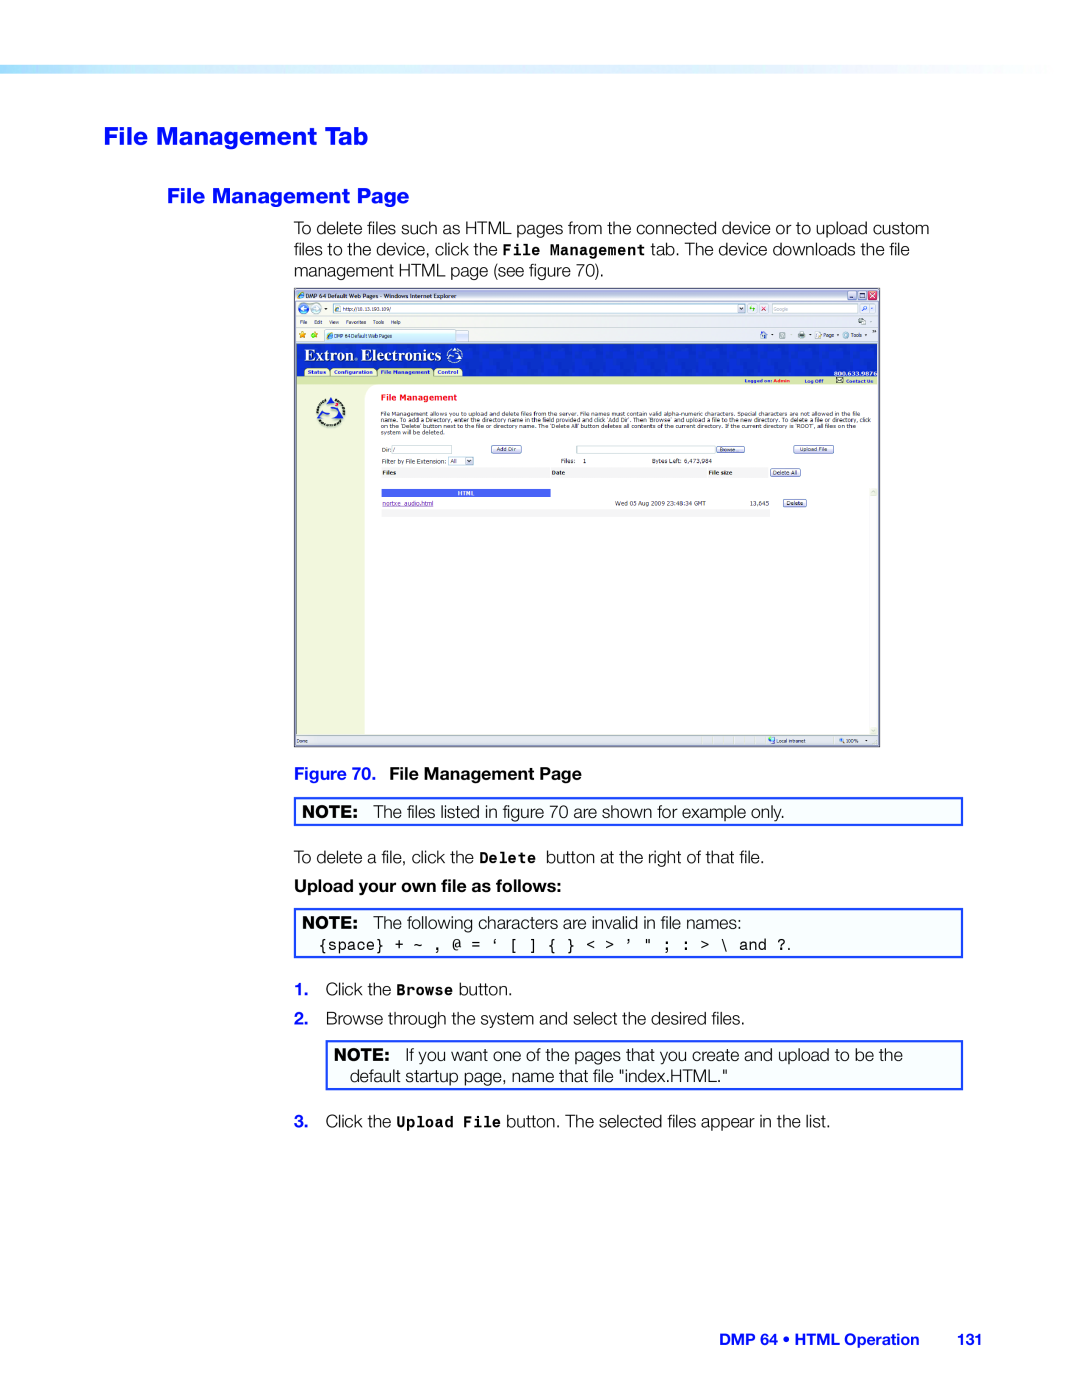 Extron electronic DMP 64 manual File Management Tab, File Management Page, Upload your own file as follows 